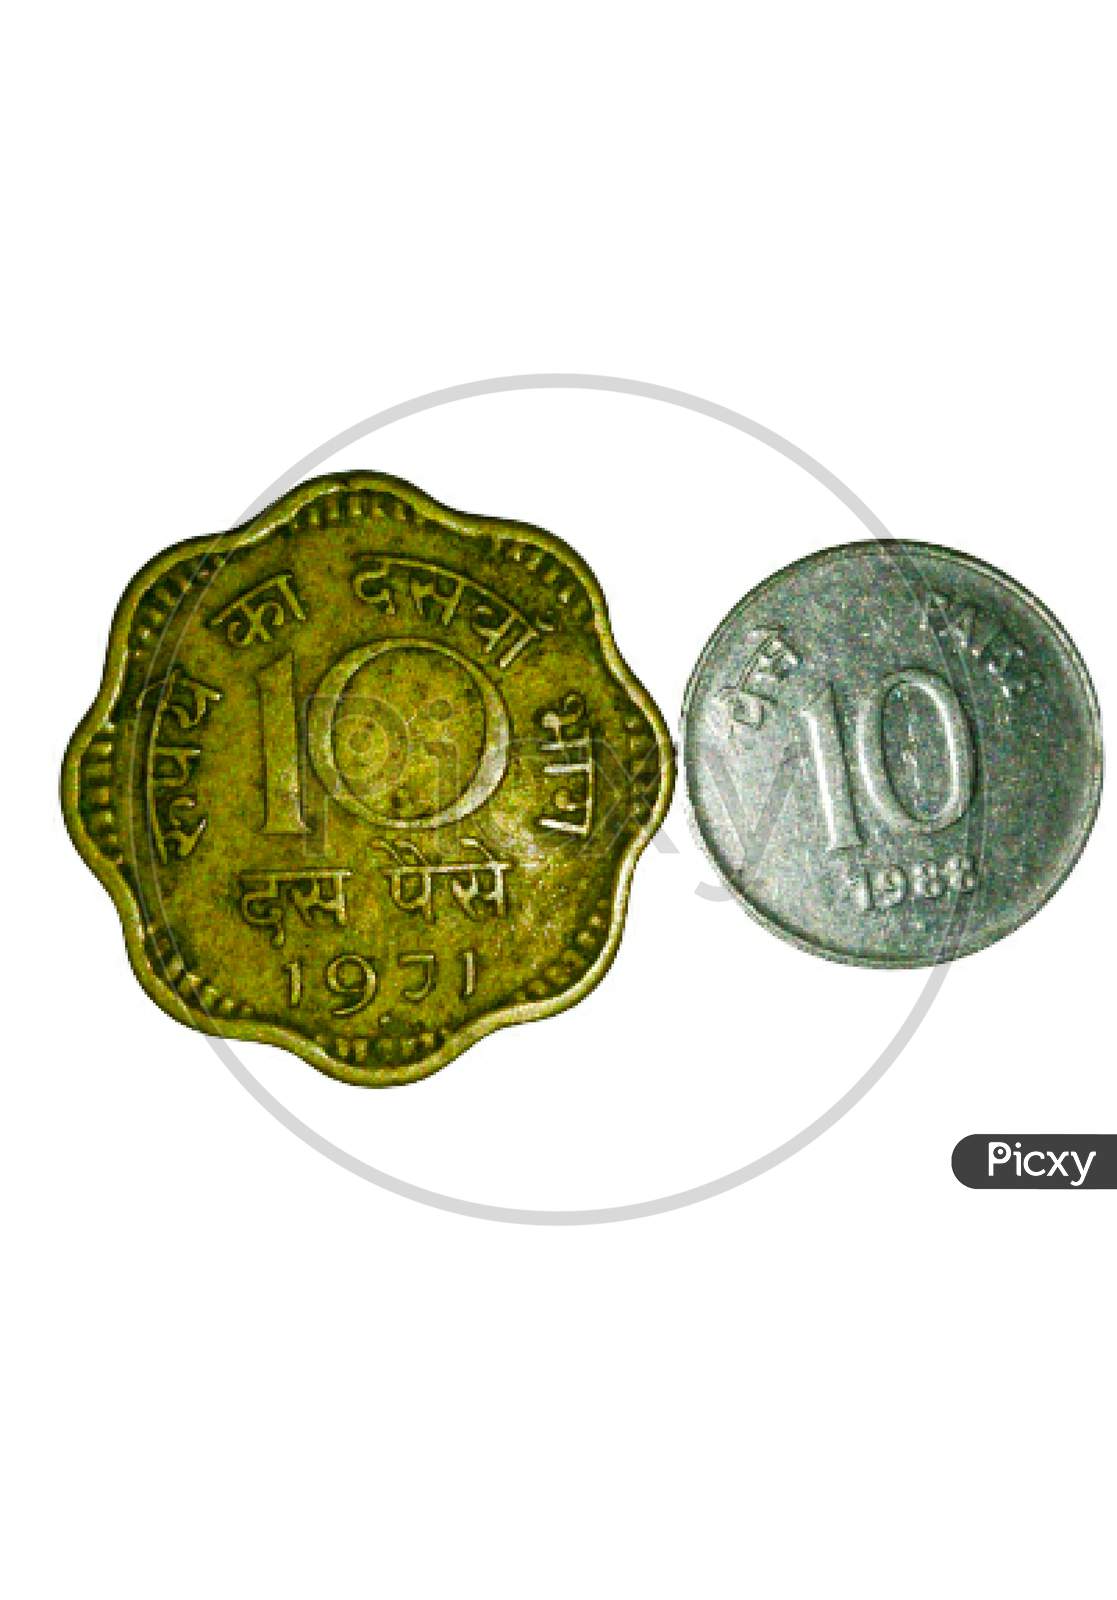 A picture of coins of 10 paise